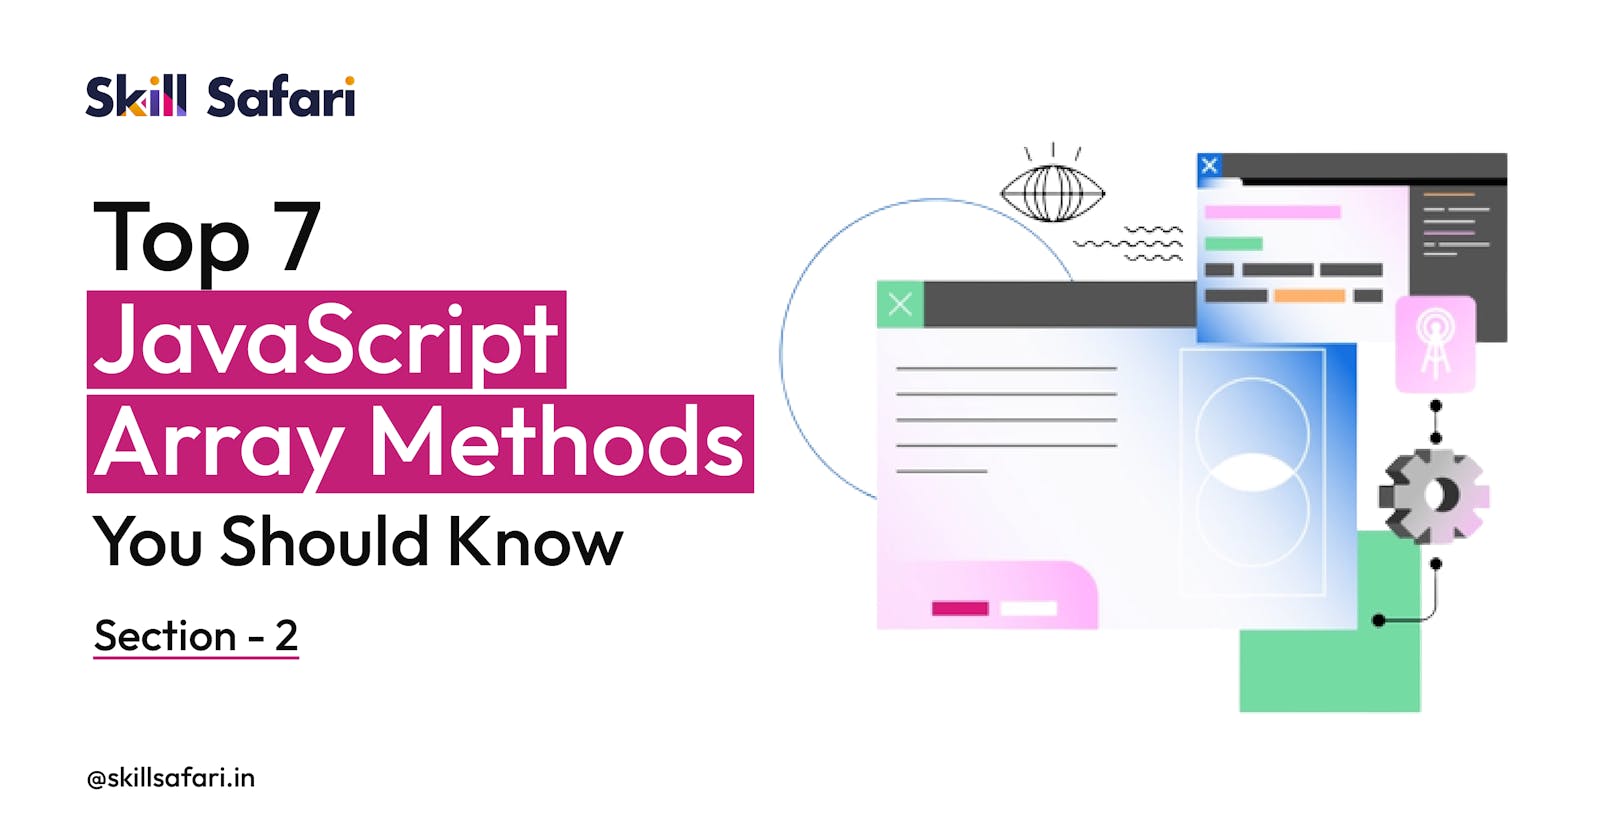 Top 7 JavaScript Array Methods You Should Know Section - 2